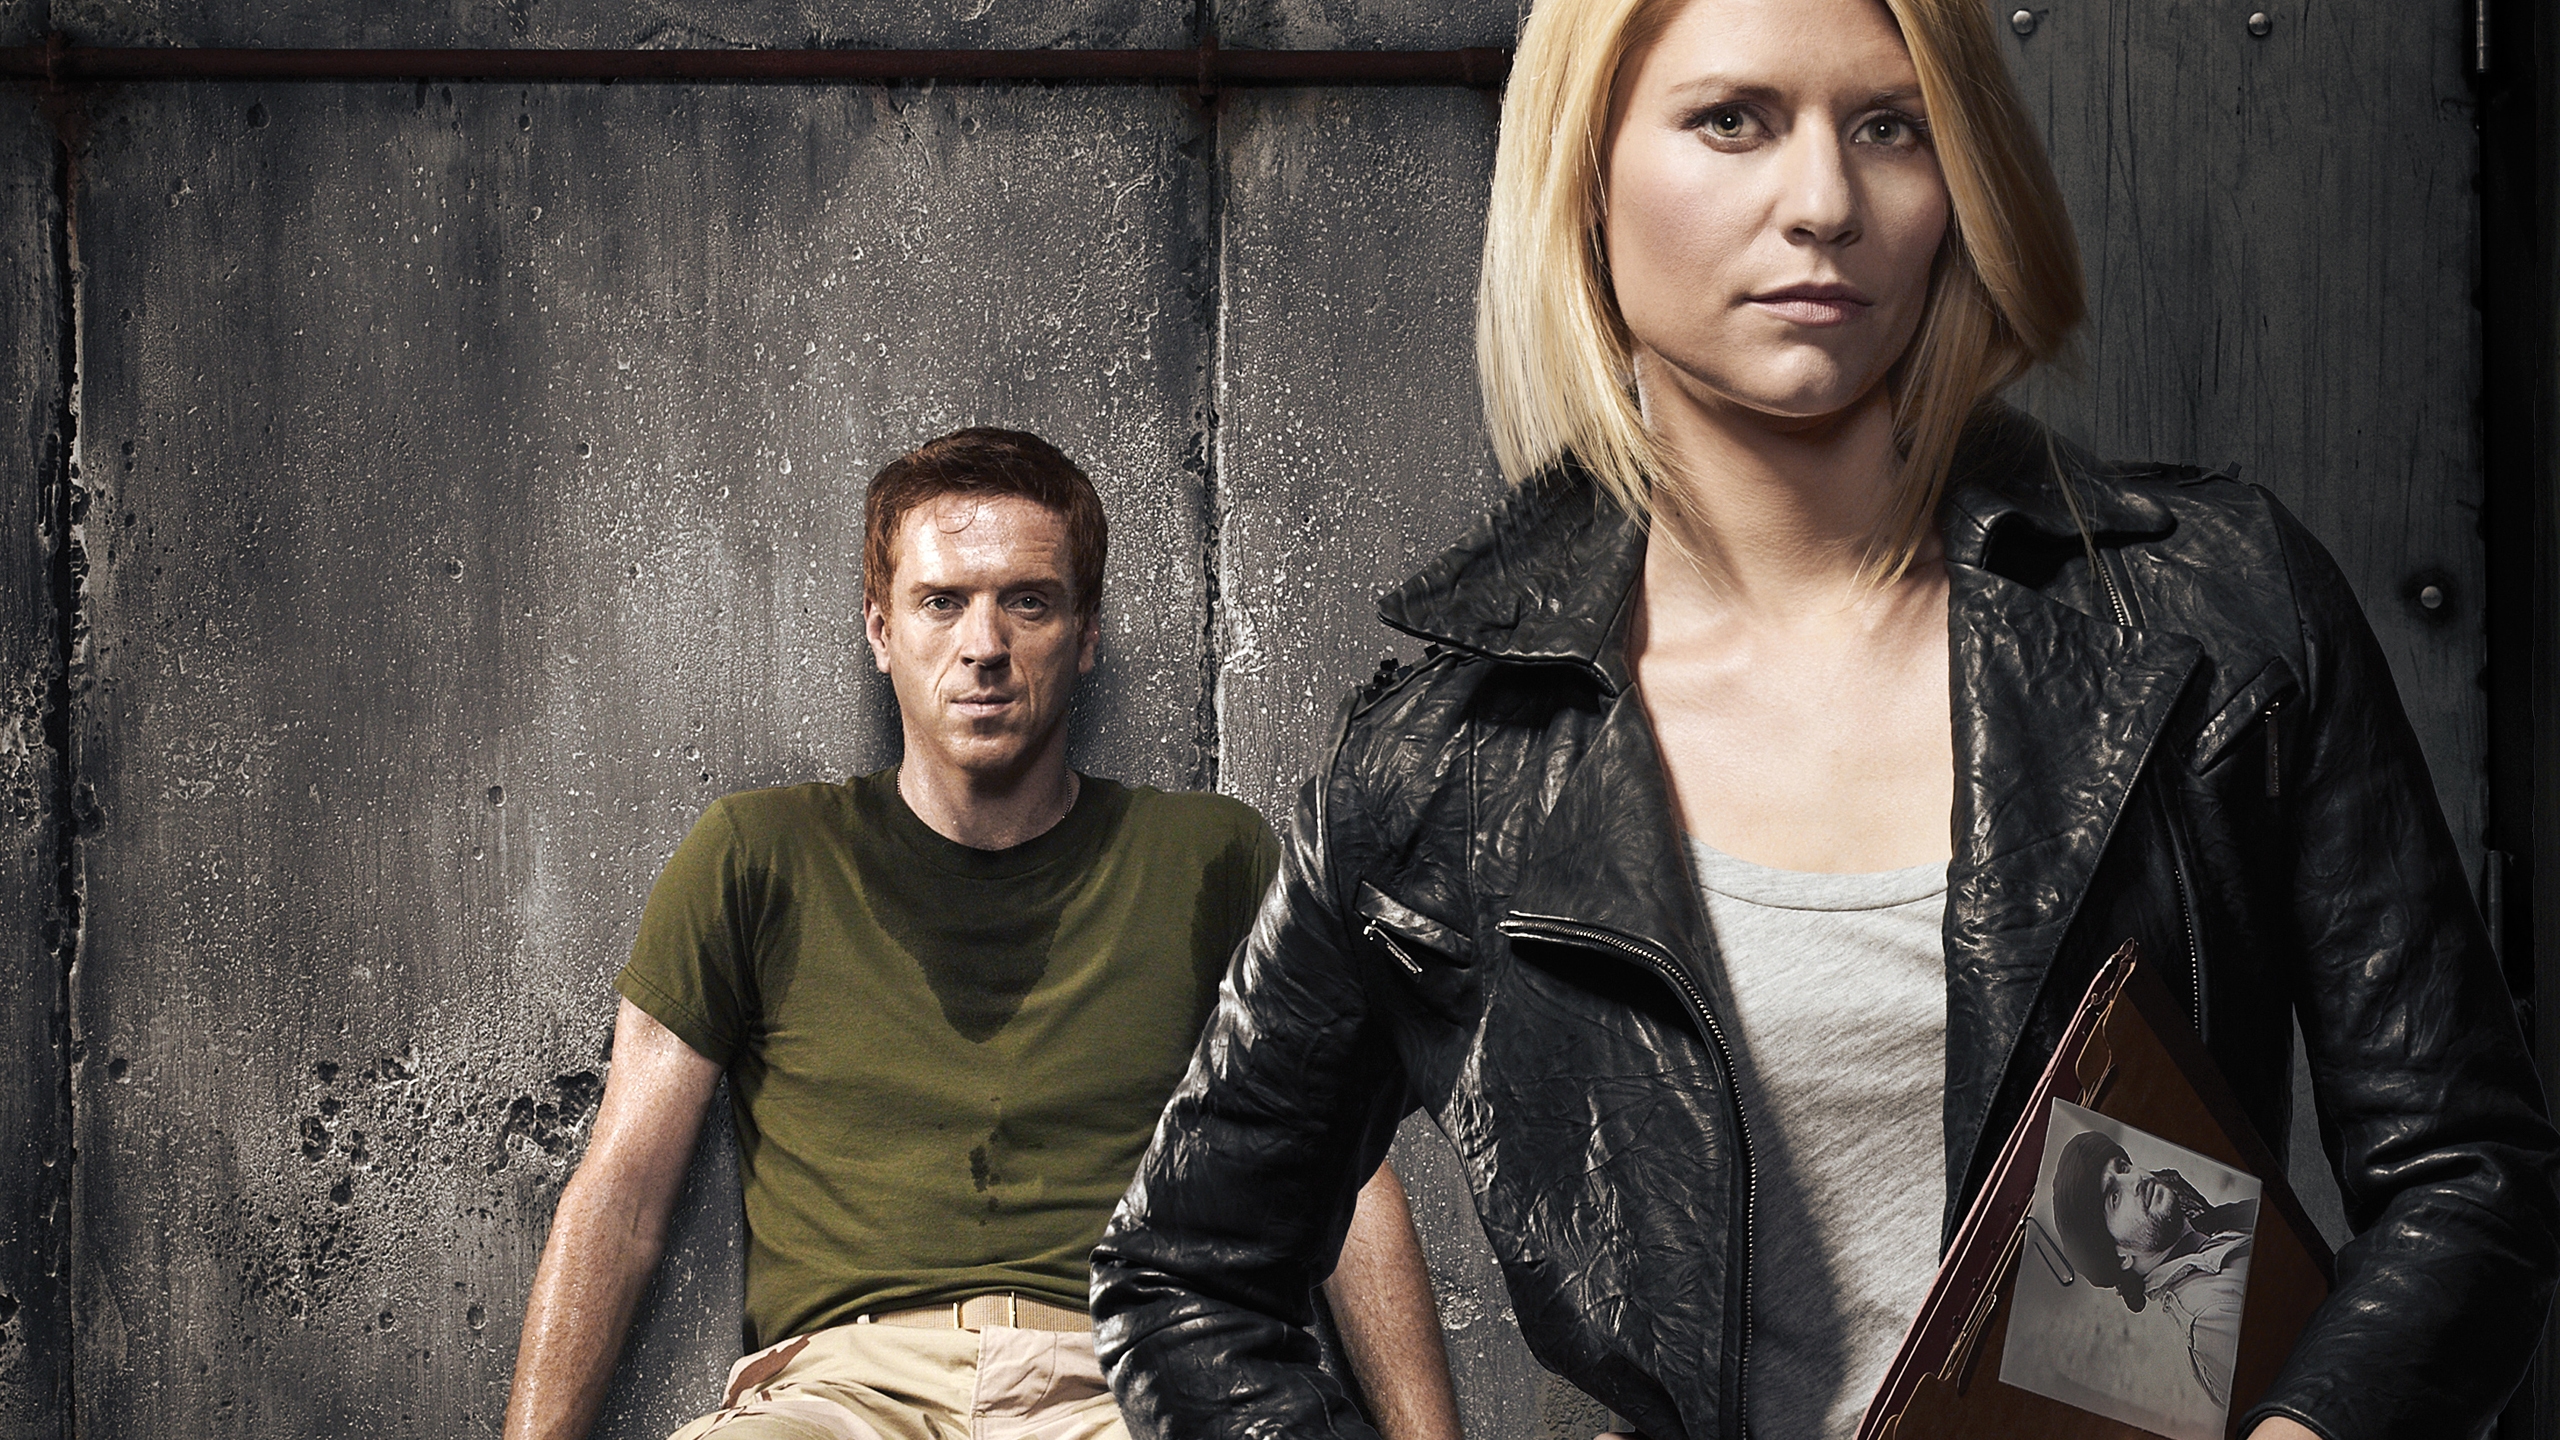 Homeland Main Characters for 2560x1440 HDTV resolution